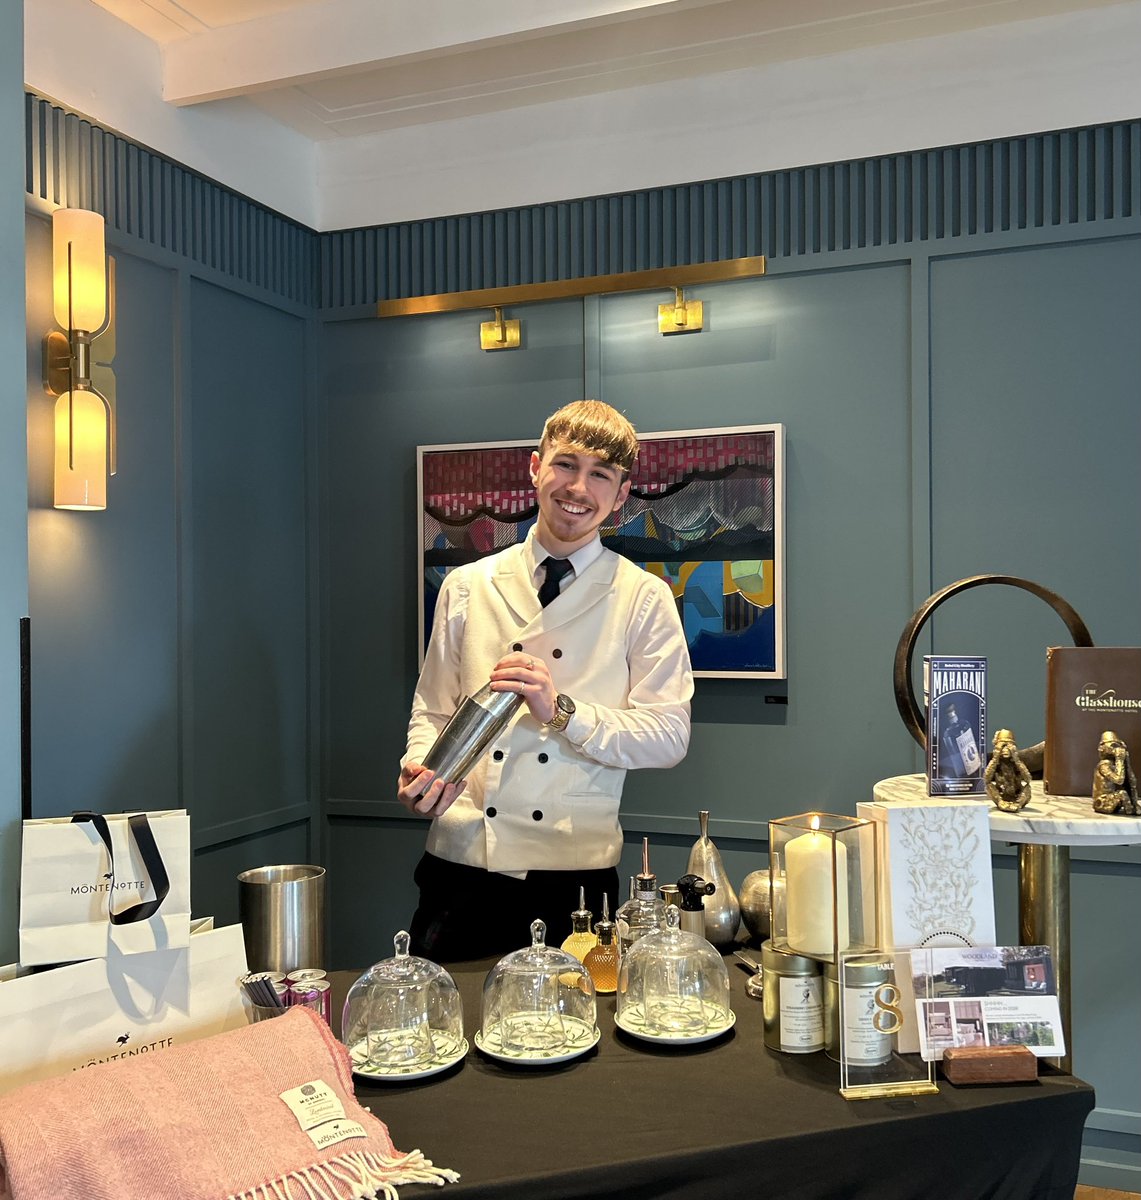 We are delighted to be taking part in the inaugural @The_VQ_Cork Inspired Cocktail Competition. Our bar supervisor Jake will be making a Maharani Mizz, utilising fantastic Maharani Gin made in Cork. #TheMontenotte #thevq #worldcocktailday